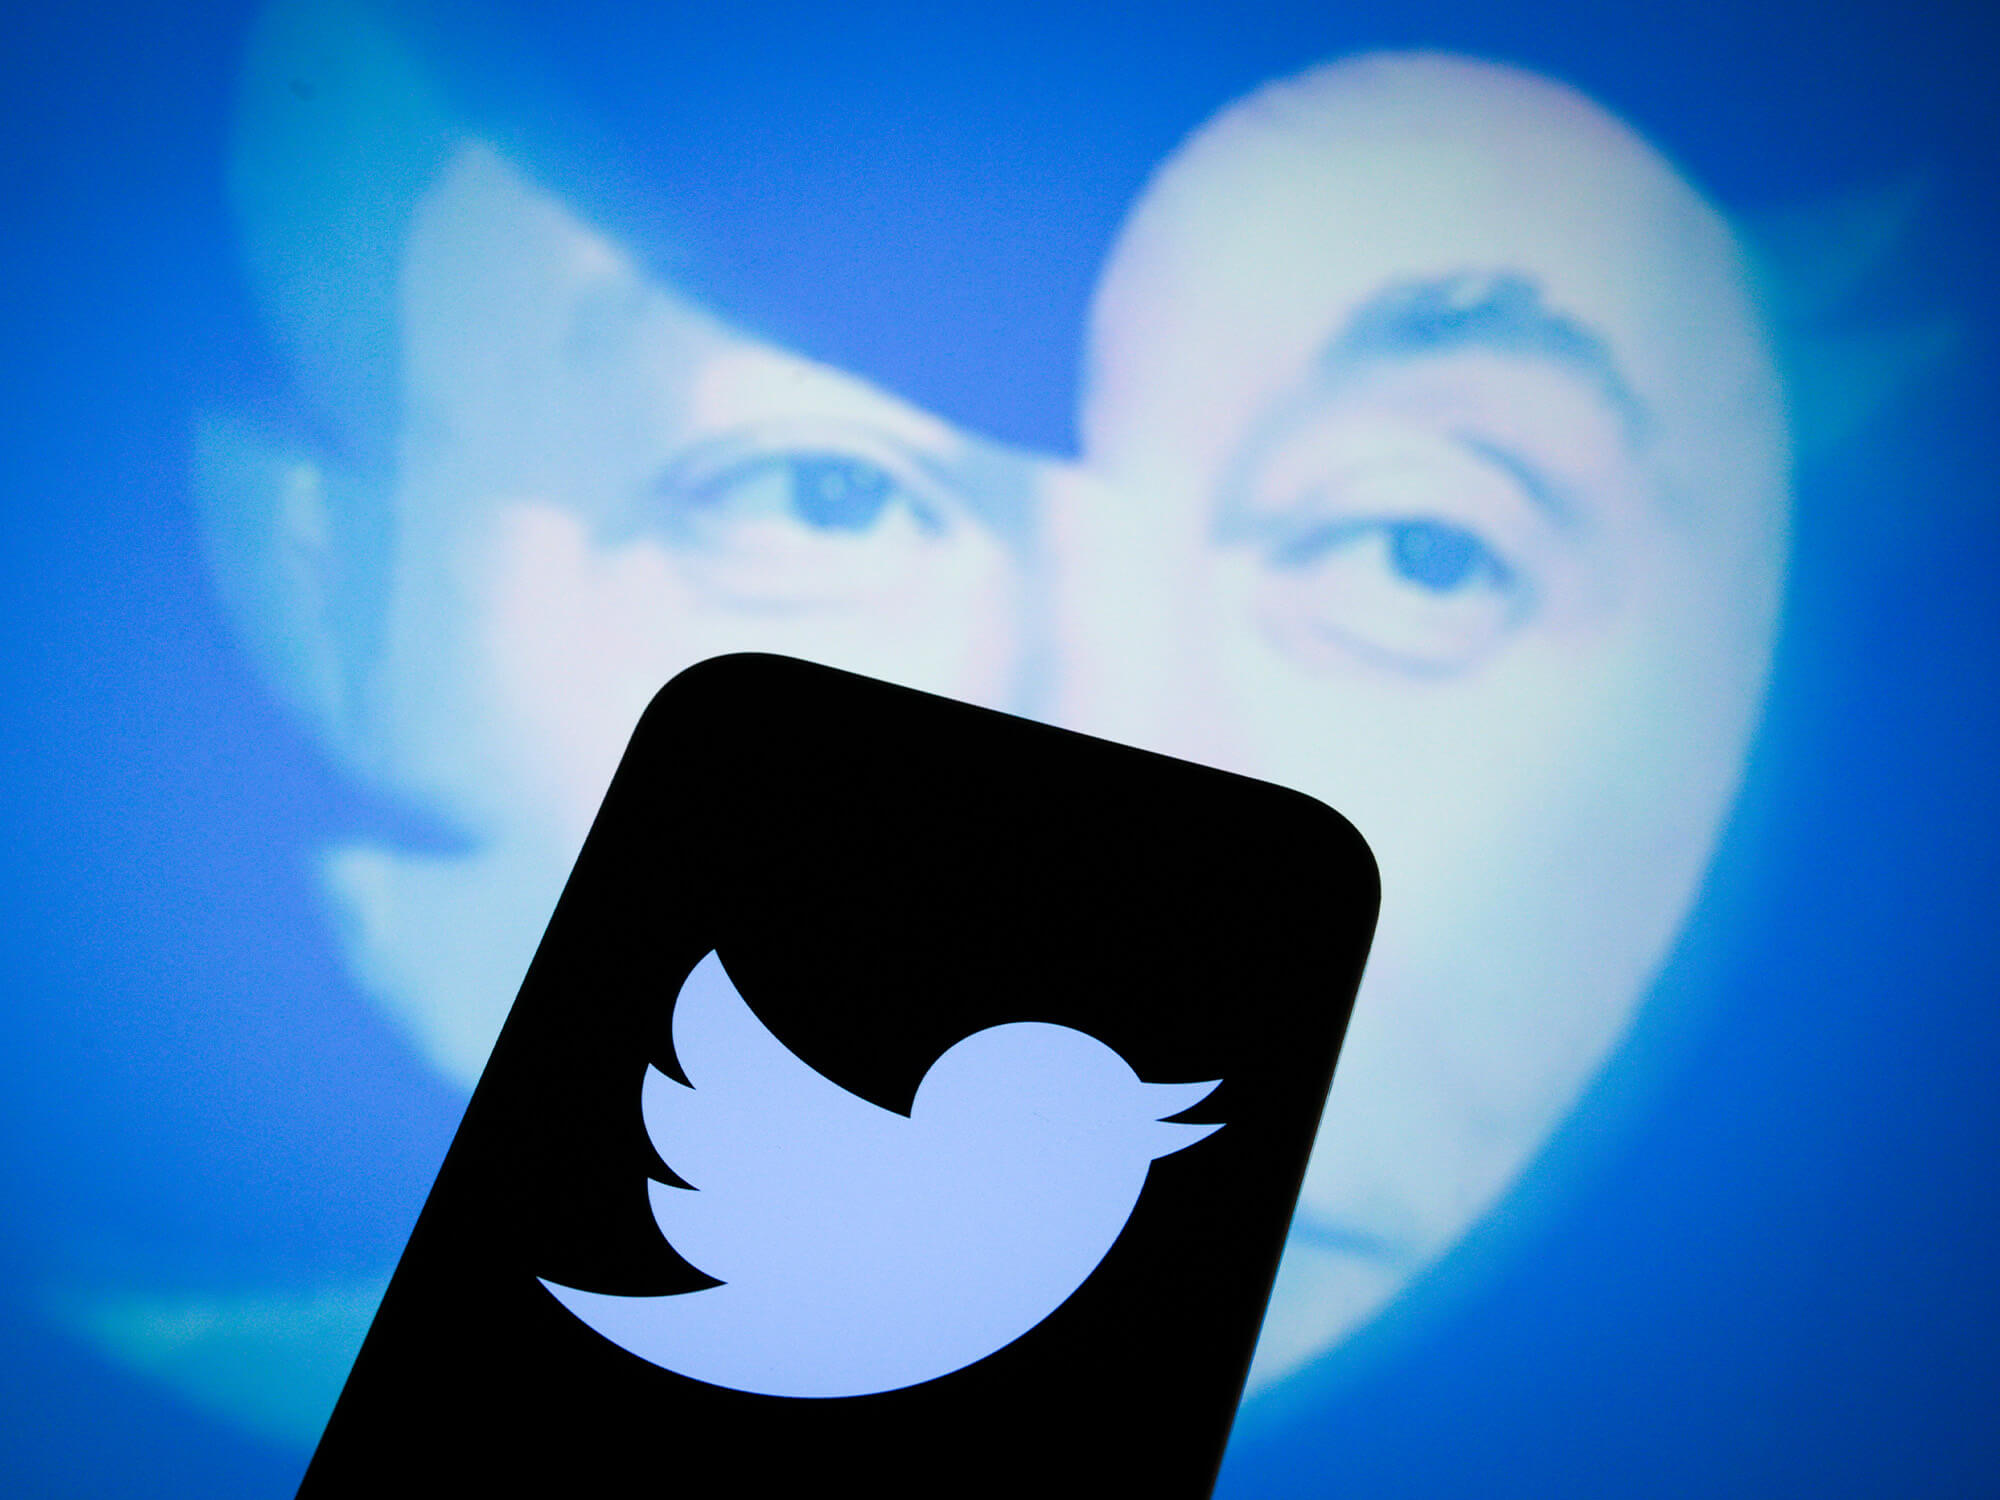 Twitter logo with Elon Musk's face in the background